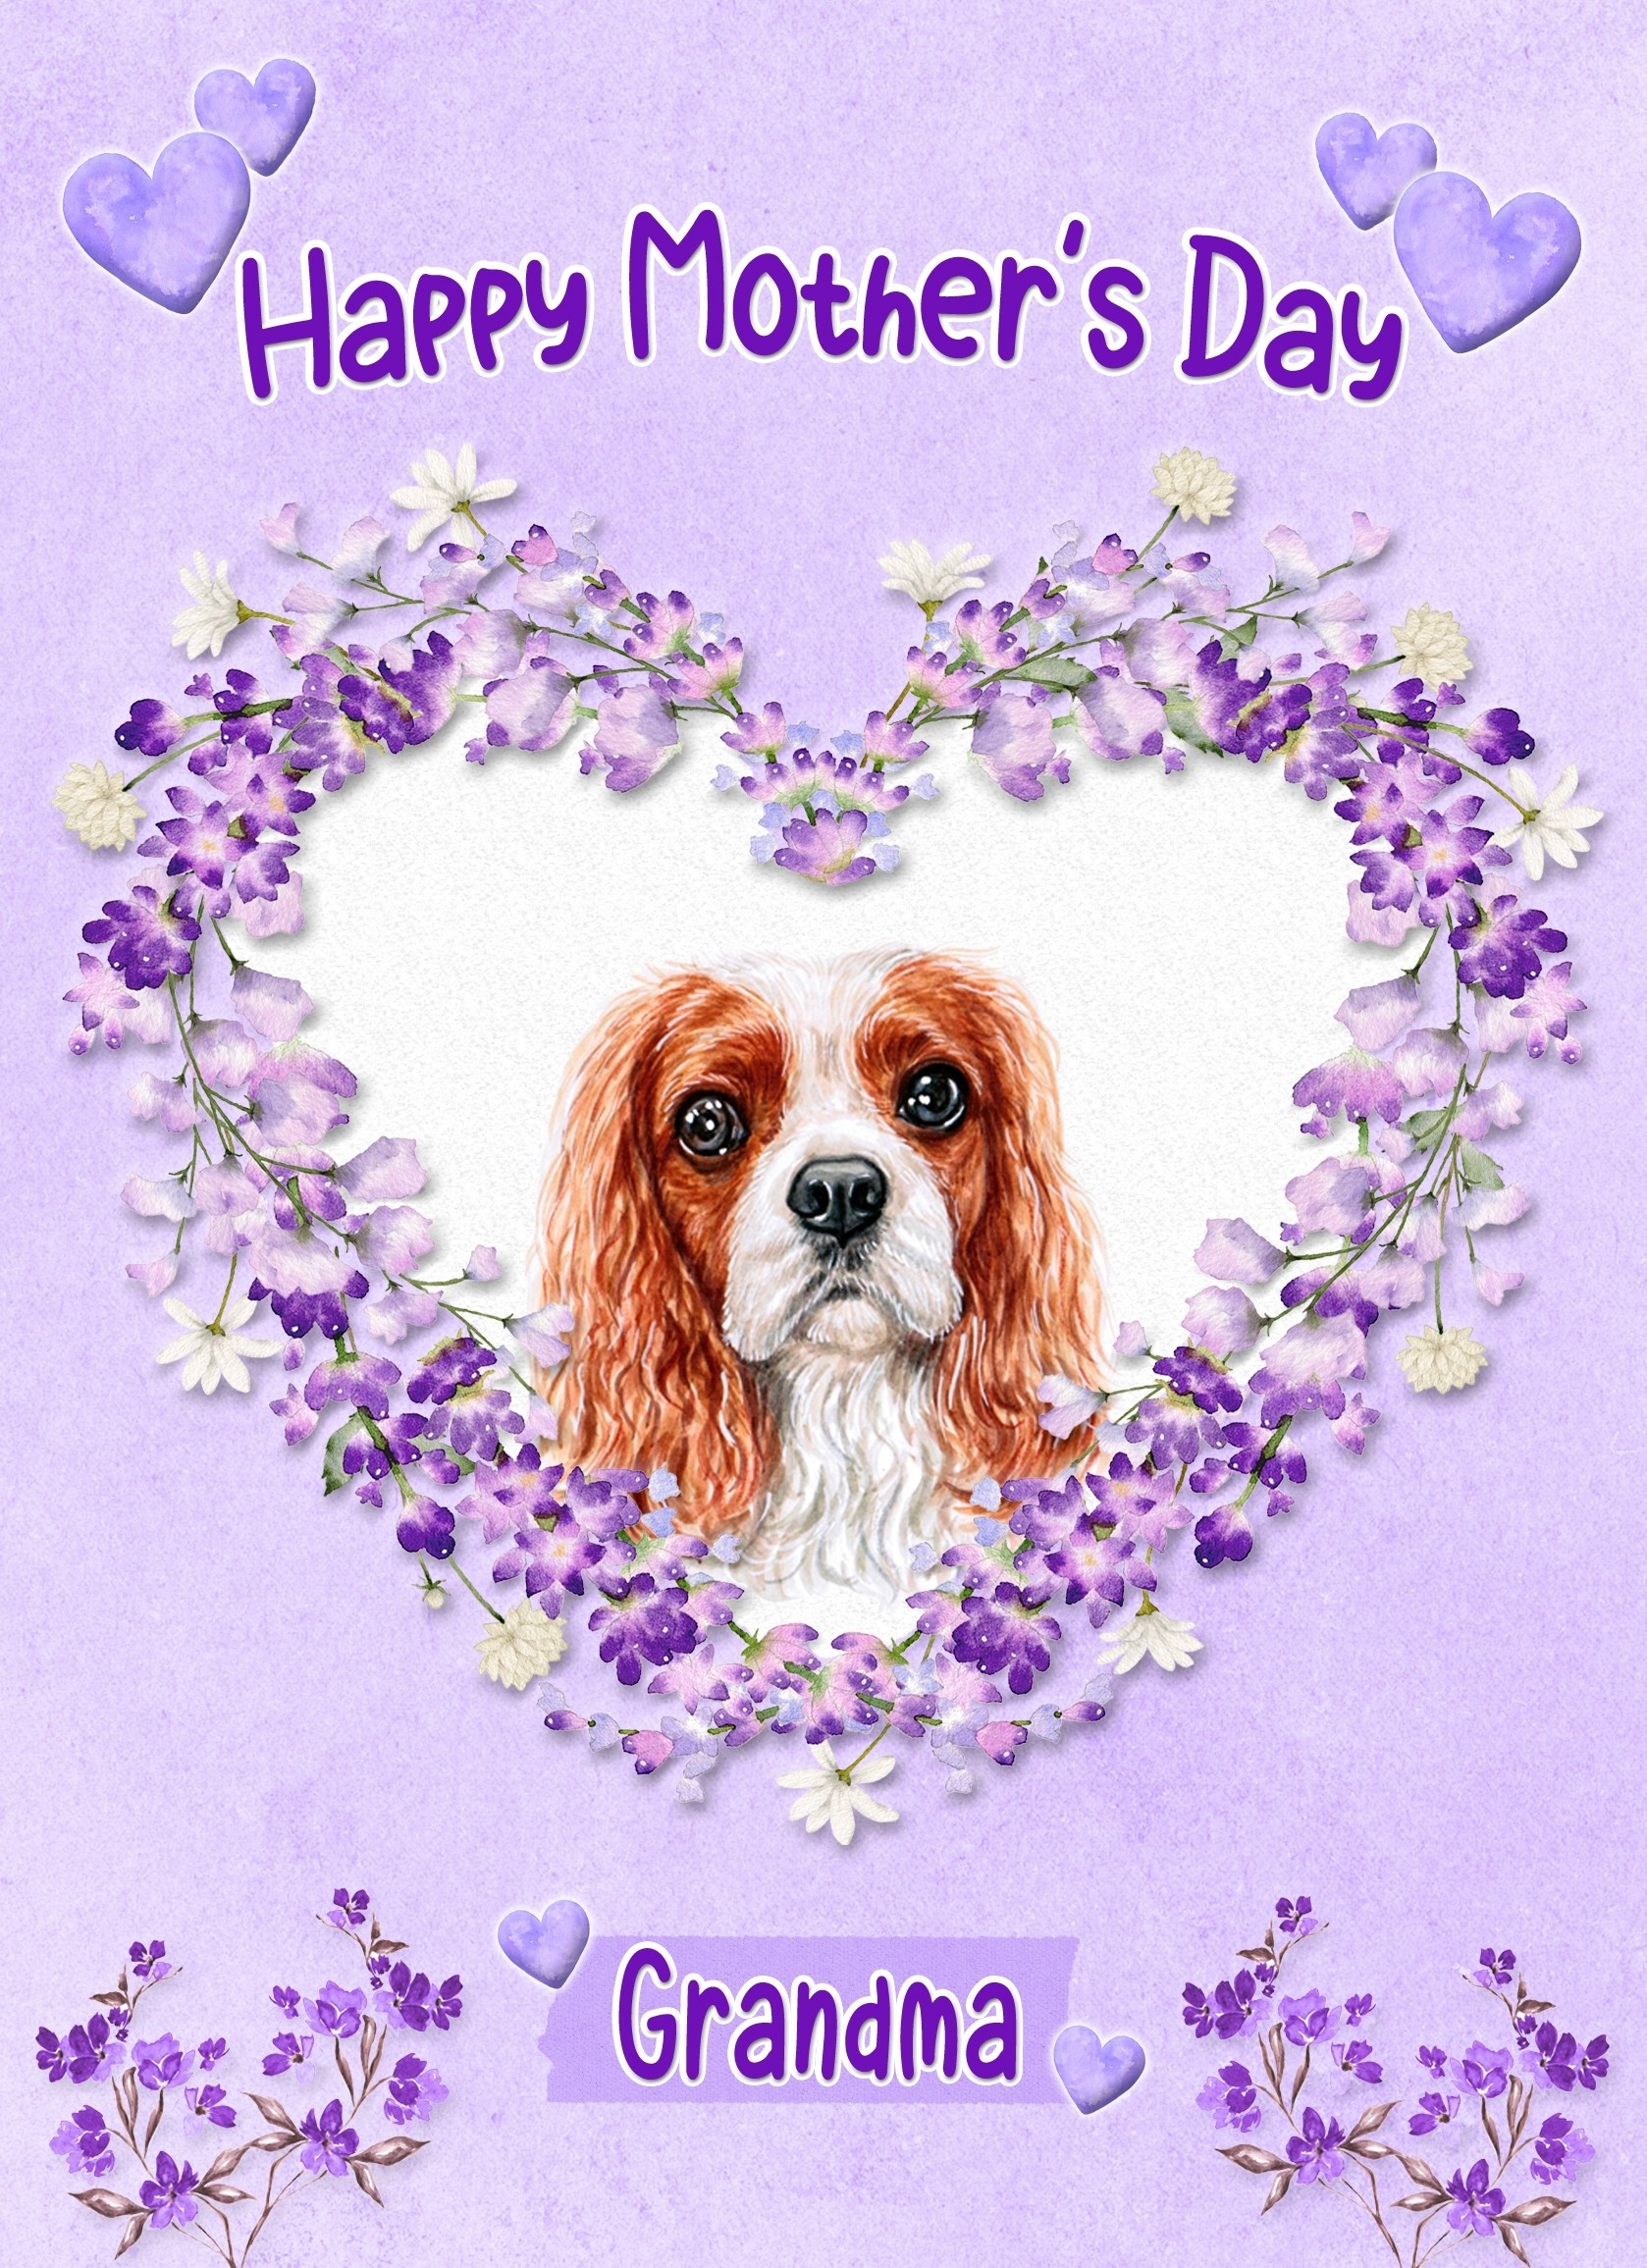 King Charles Spaniel Dog Mothers Day Card (Happy Mothers, Grandma)